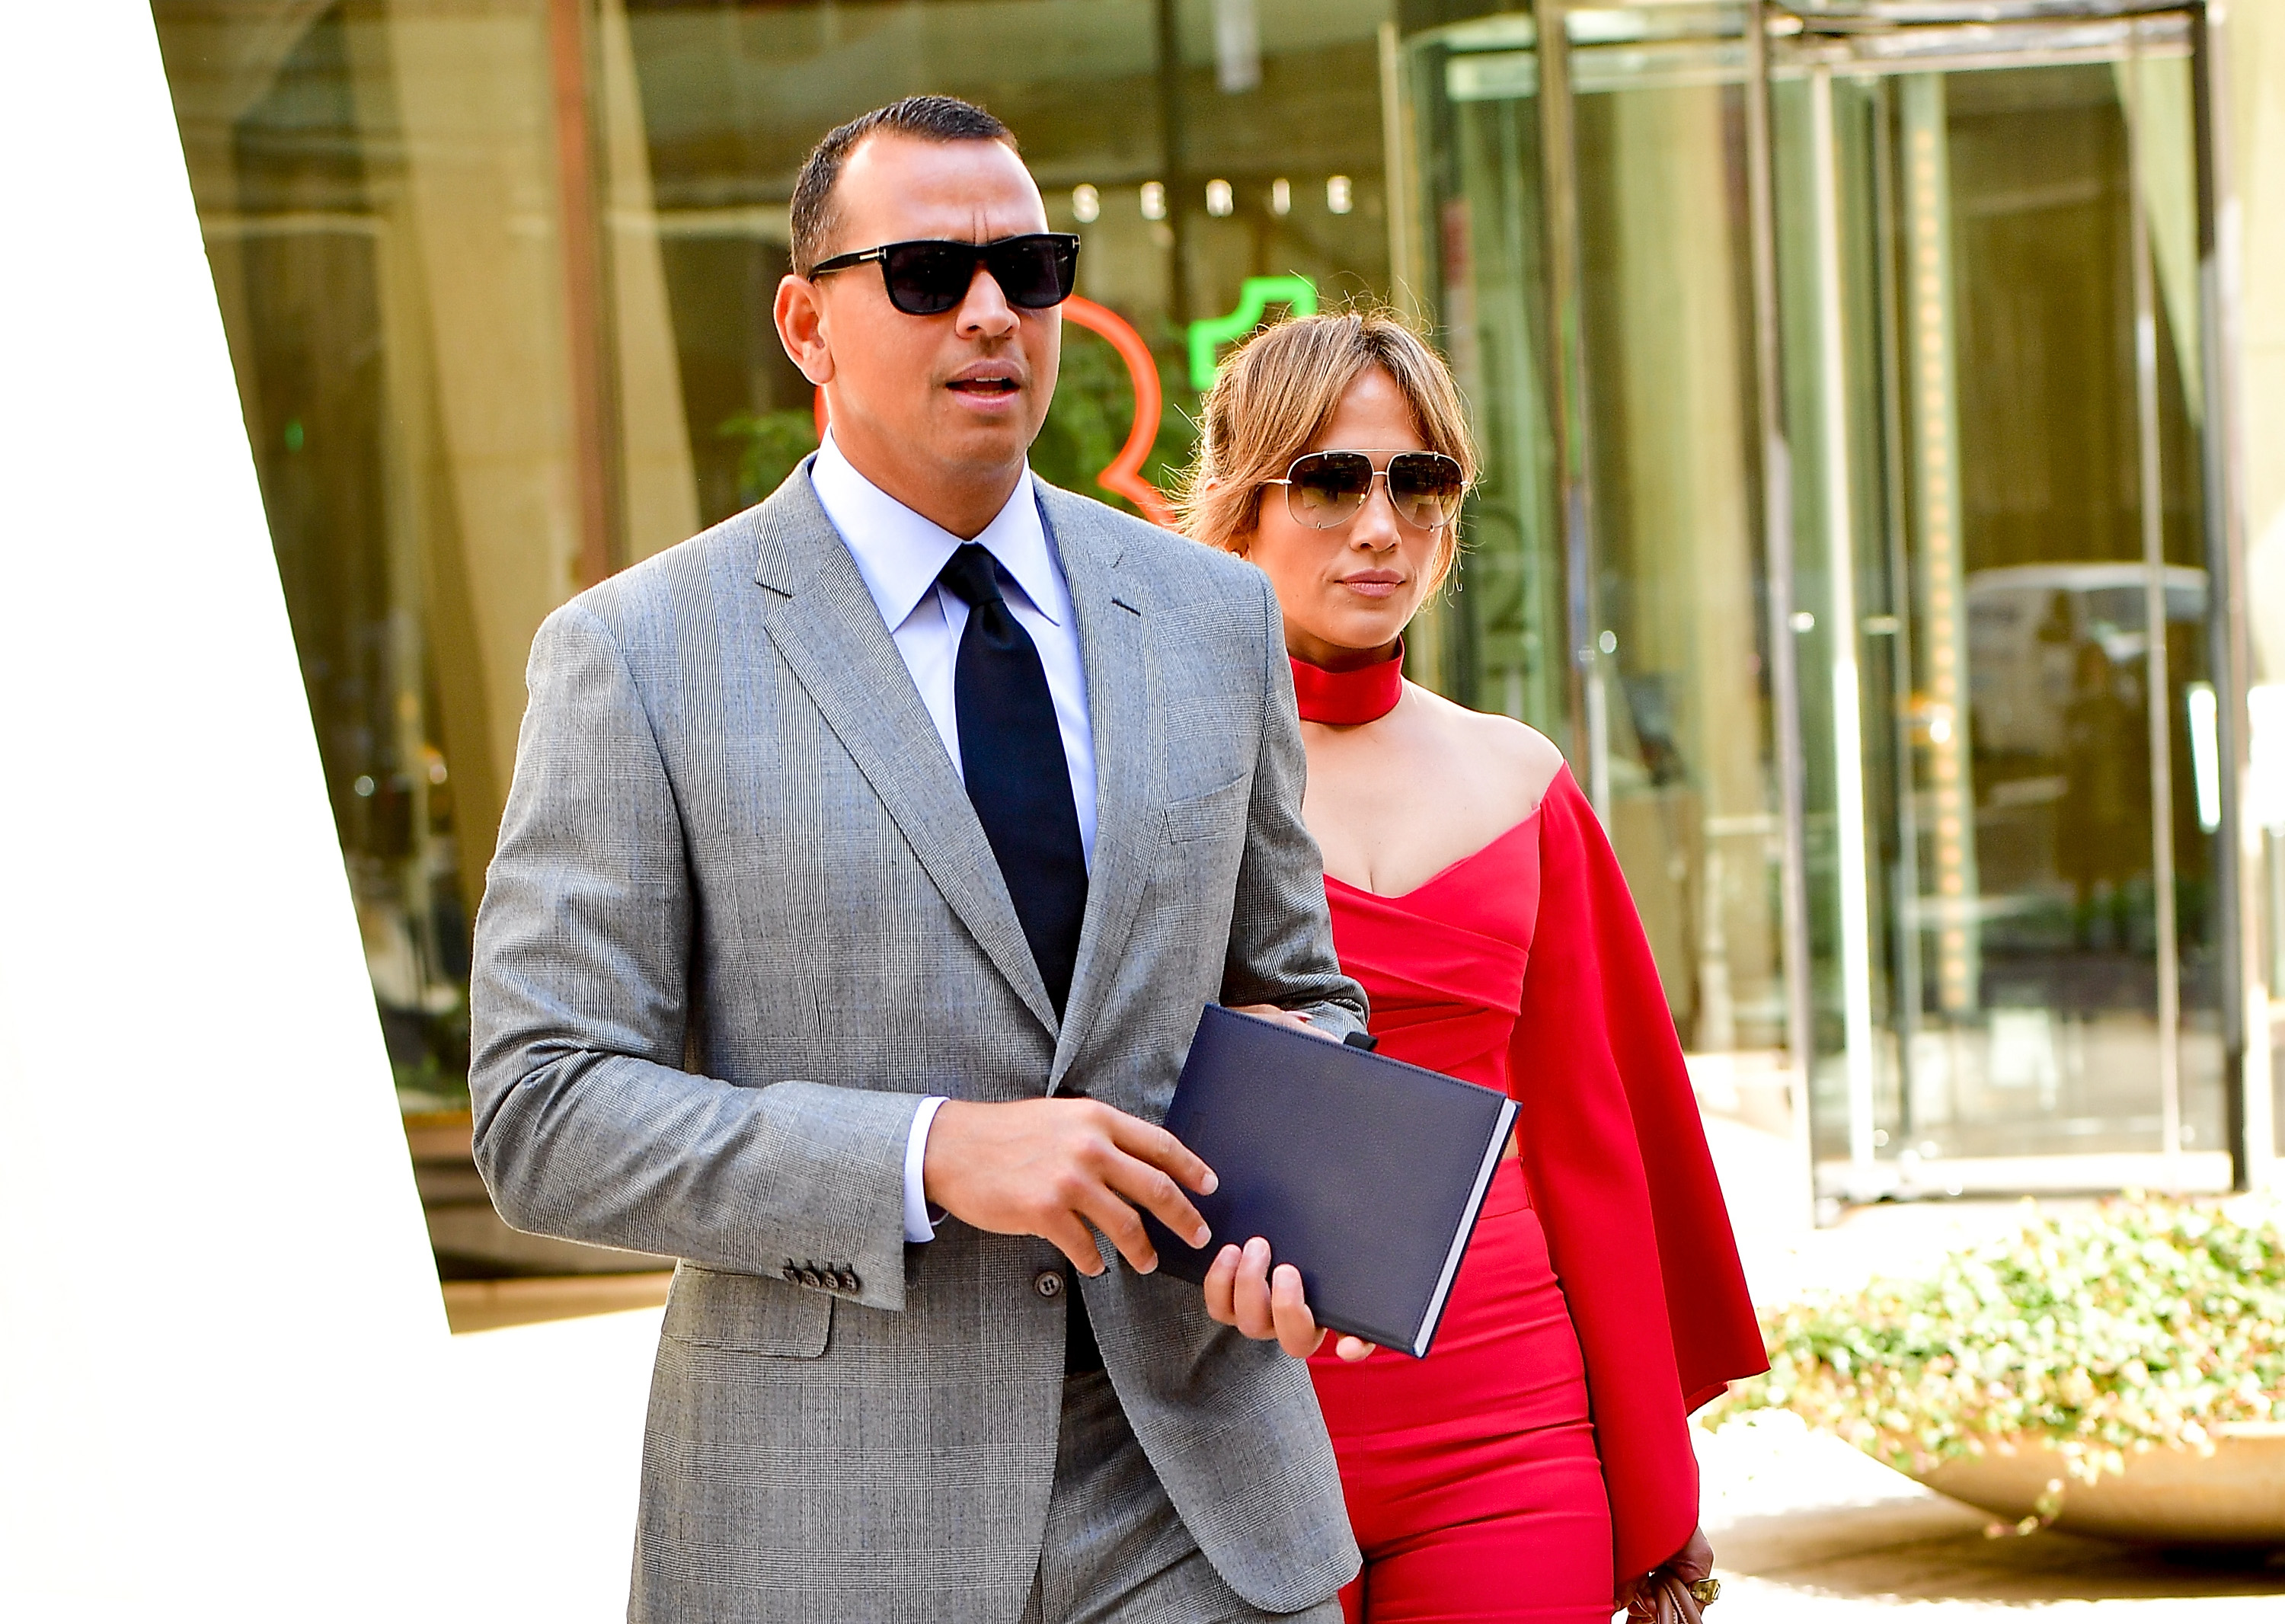 NEW YORK, NY - APRIL 03:  Alex Rodriguez and Jennifer Lopez leave the Solow Building on April 3, 2017 in New York City.  (Photo by James Devaney/GC Images) (James Devaney&mdash;GC Images)